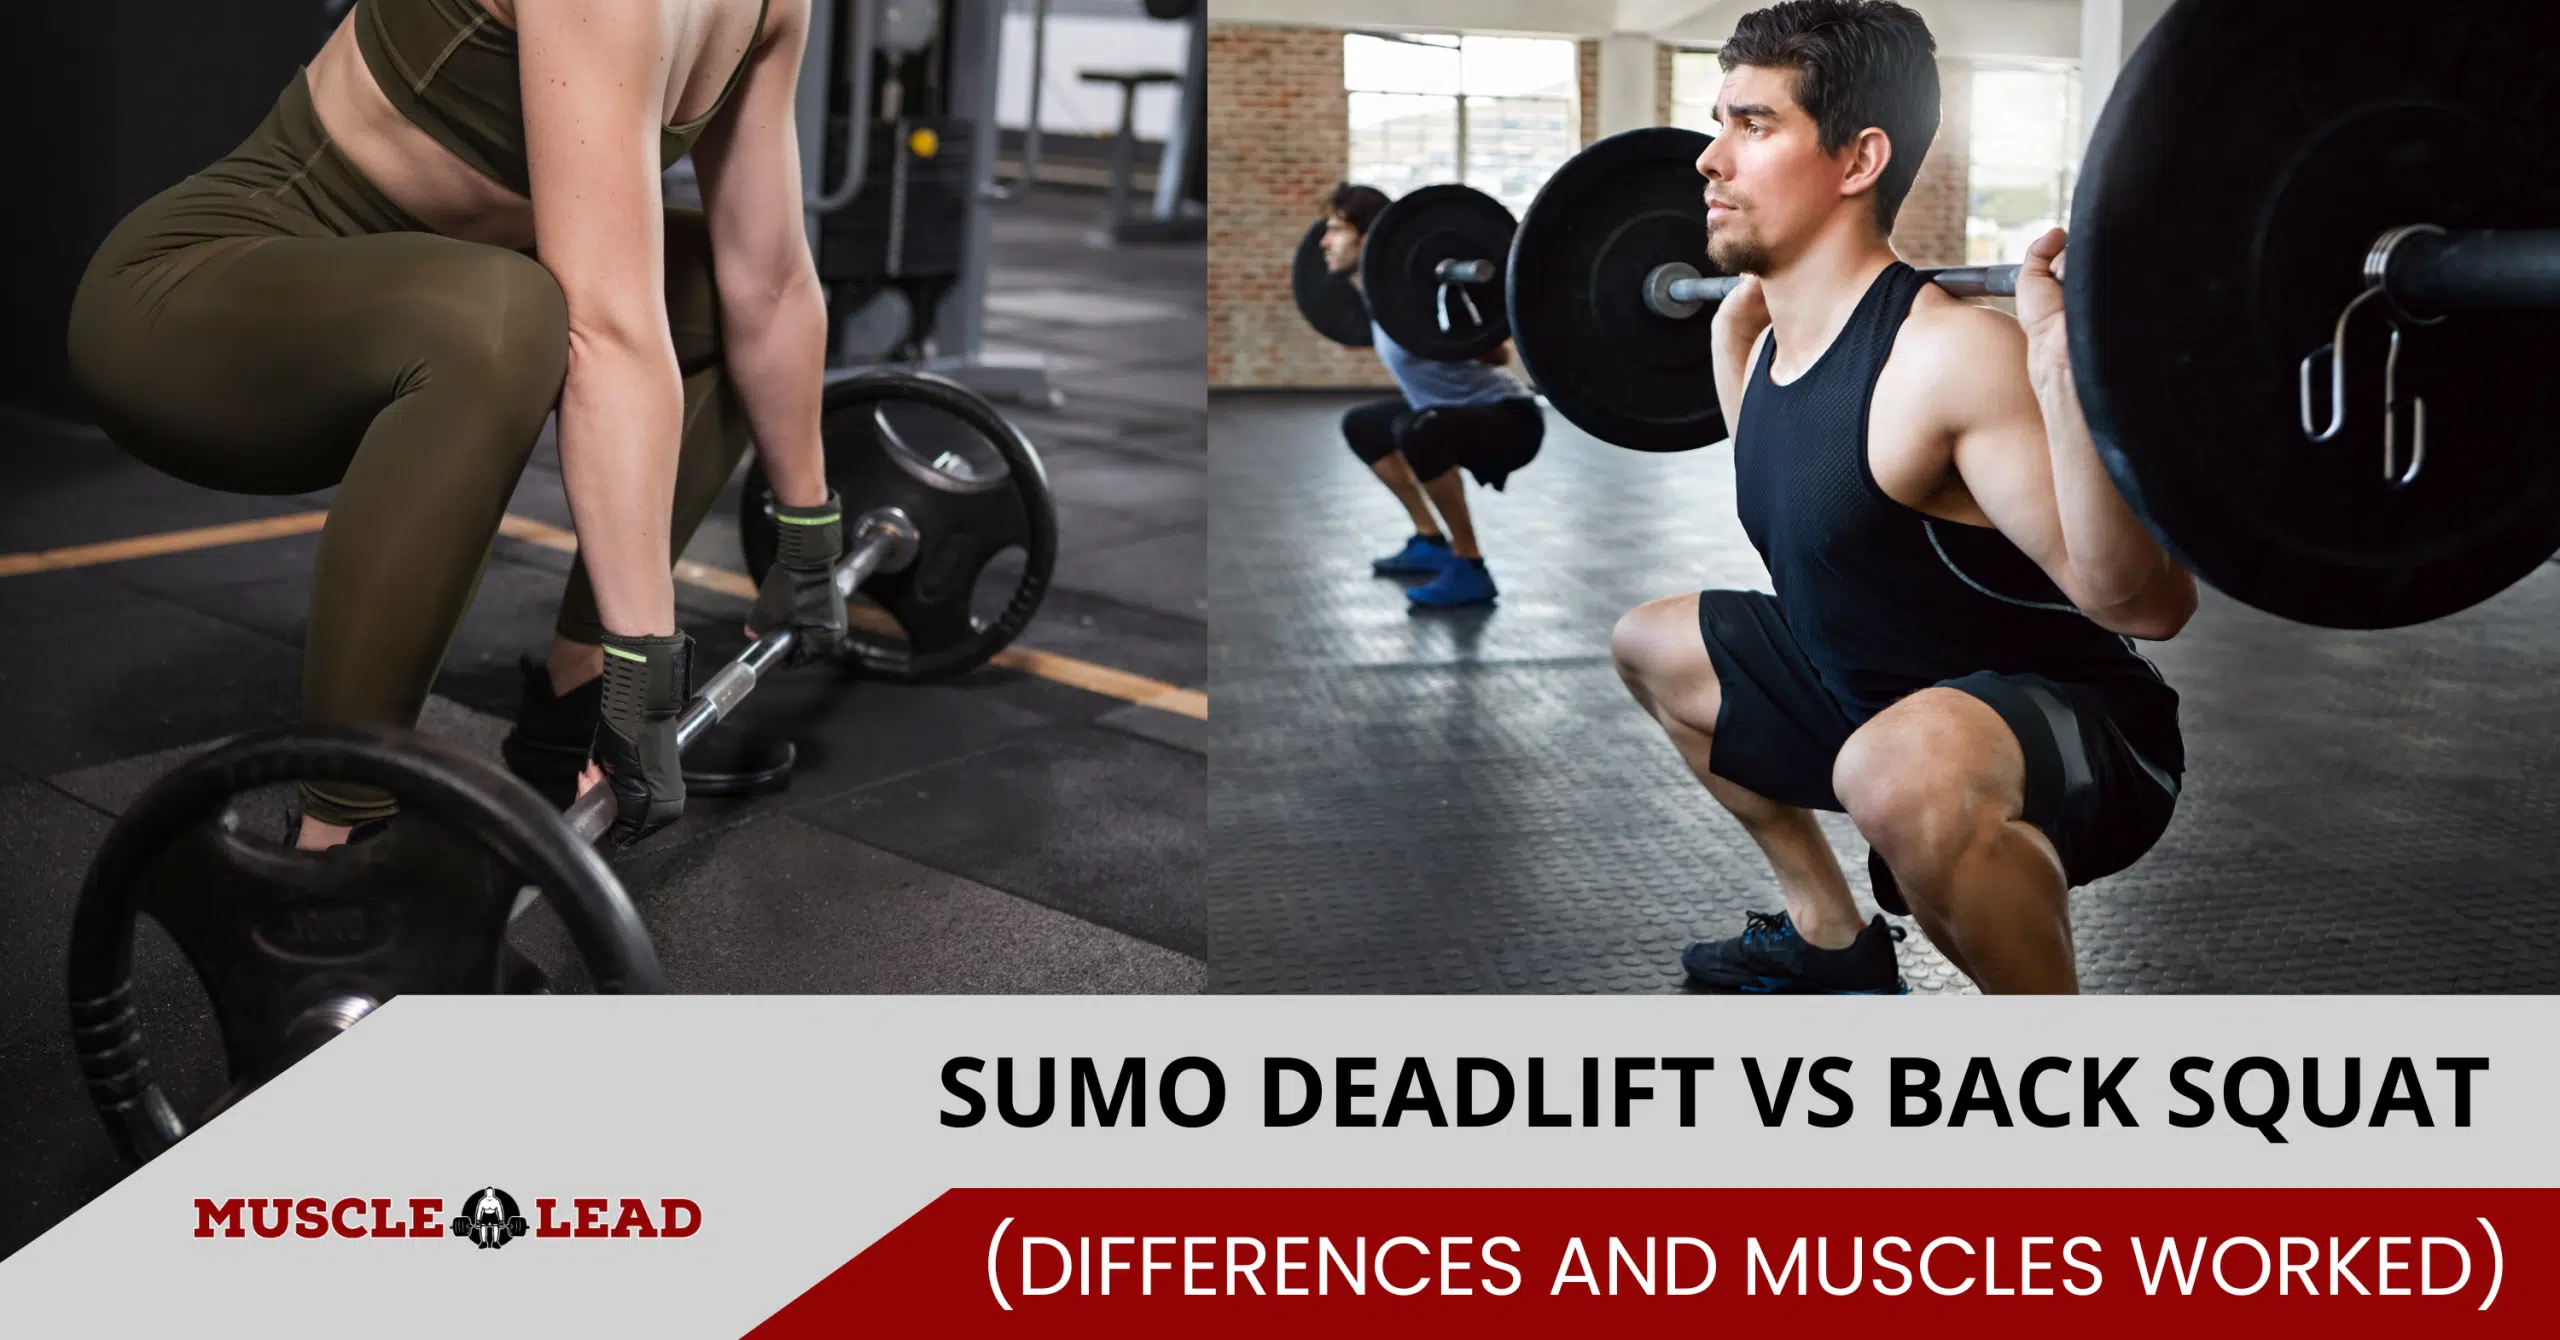 Sumo Deadlift vs Back Squat: Differences and Muscles Worked